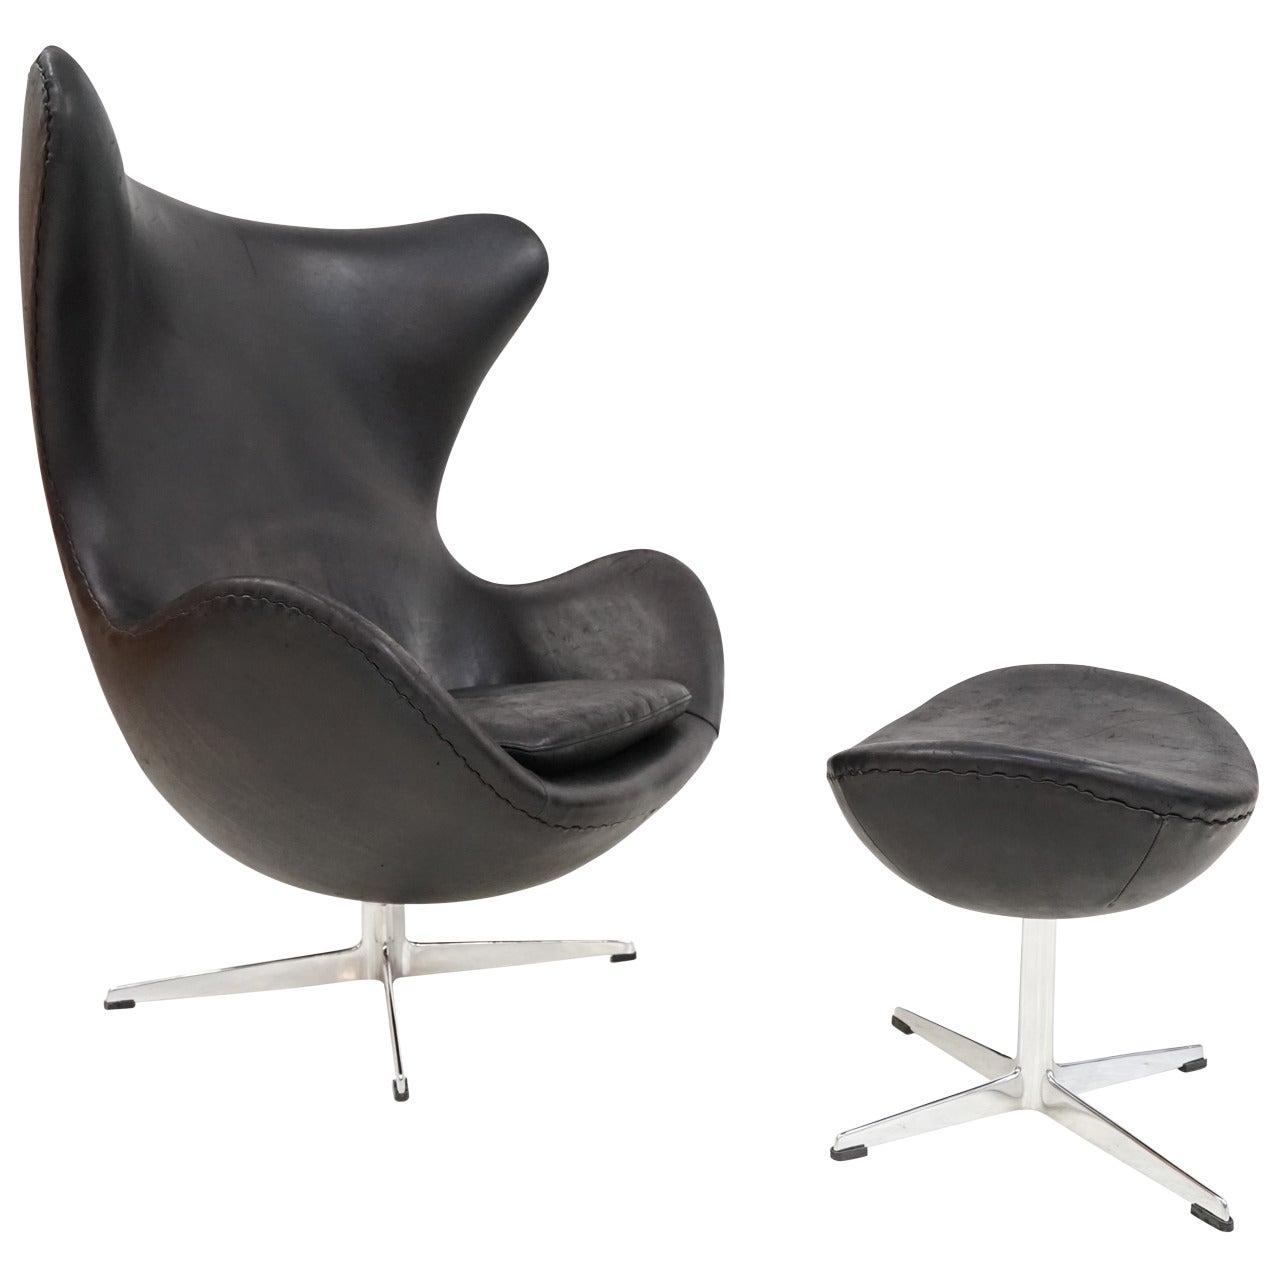 Early Arne Jacobsen Leather Egg Chair with Ottoman by Fritz Hansen For Sale